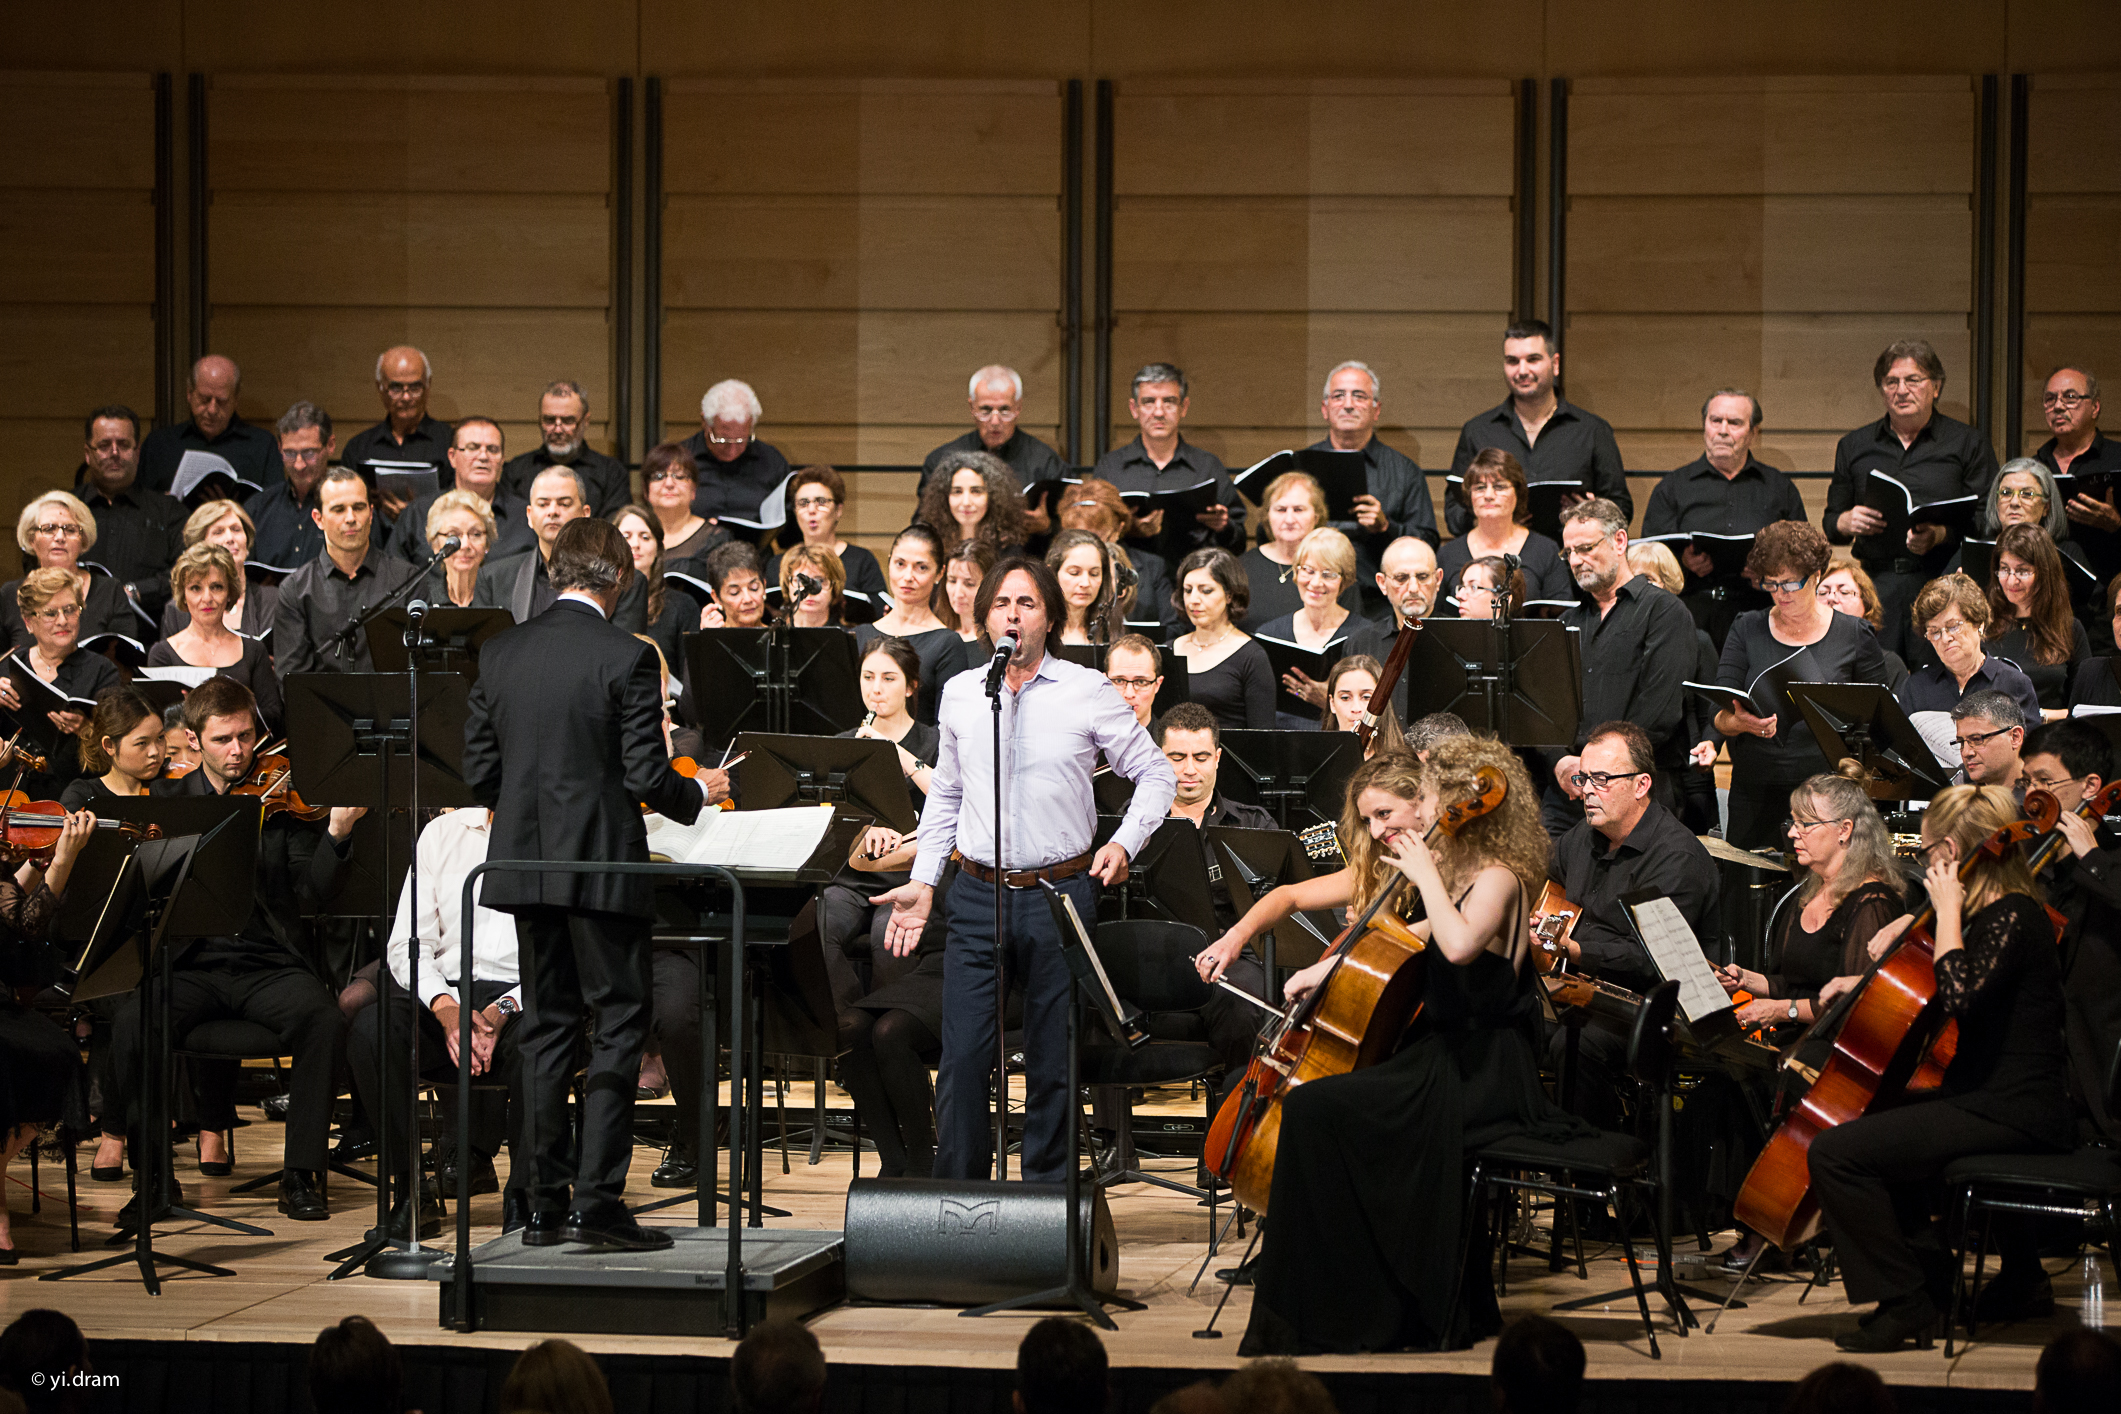 Conductor George Ellis, vocalist Vasilis Lekkas performed with Millenium Choir at Axiom Axis, the first partnership event between the Greek Festival of Sydney and City Recital Hall.